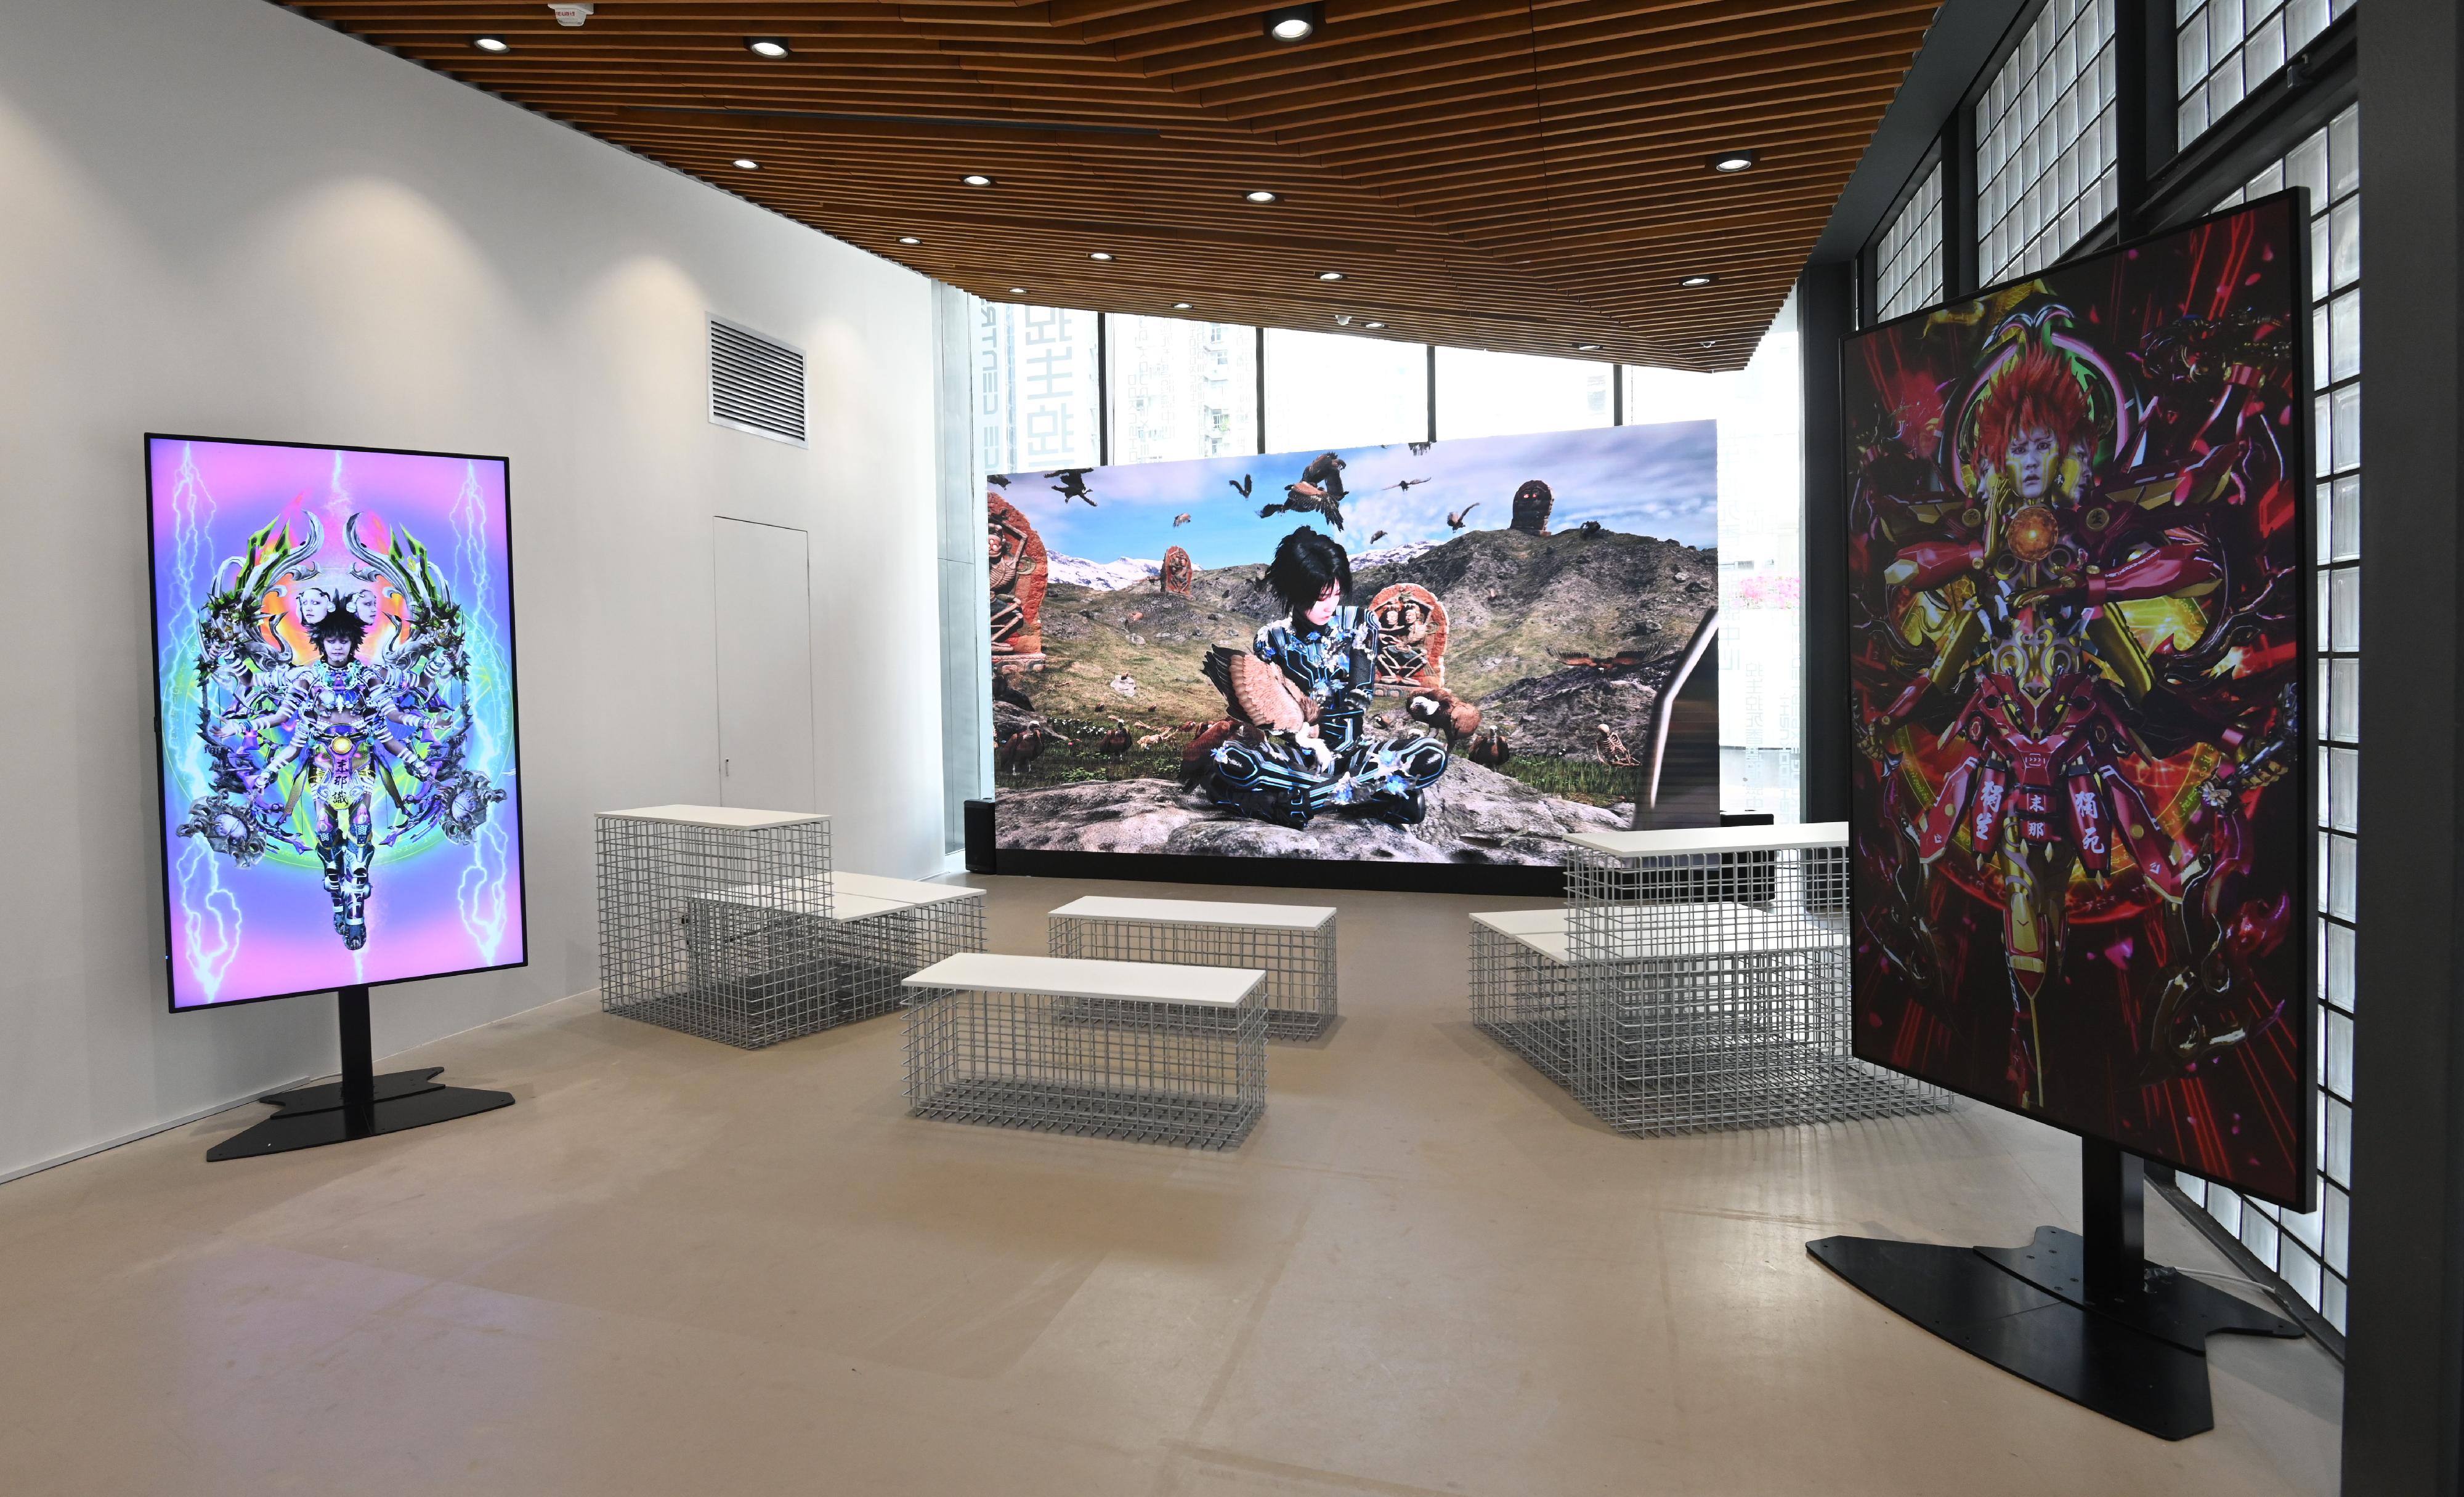 The "DOKU Hong Kong Experience Centre" exhibition by Mainland new media artist Lu Yang will be on display from tomorrow (March 18) in Oi! Glassie. The exhibition showcases six forms of the hyperrealistic digital avatar "DOKU", as if the soul is travelling across the six realms of Buddhist reincarnation.